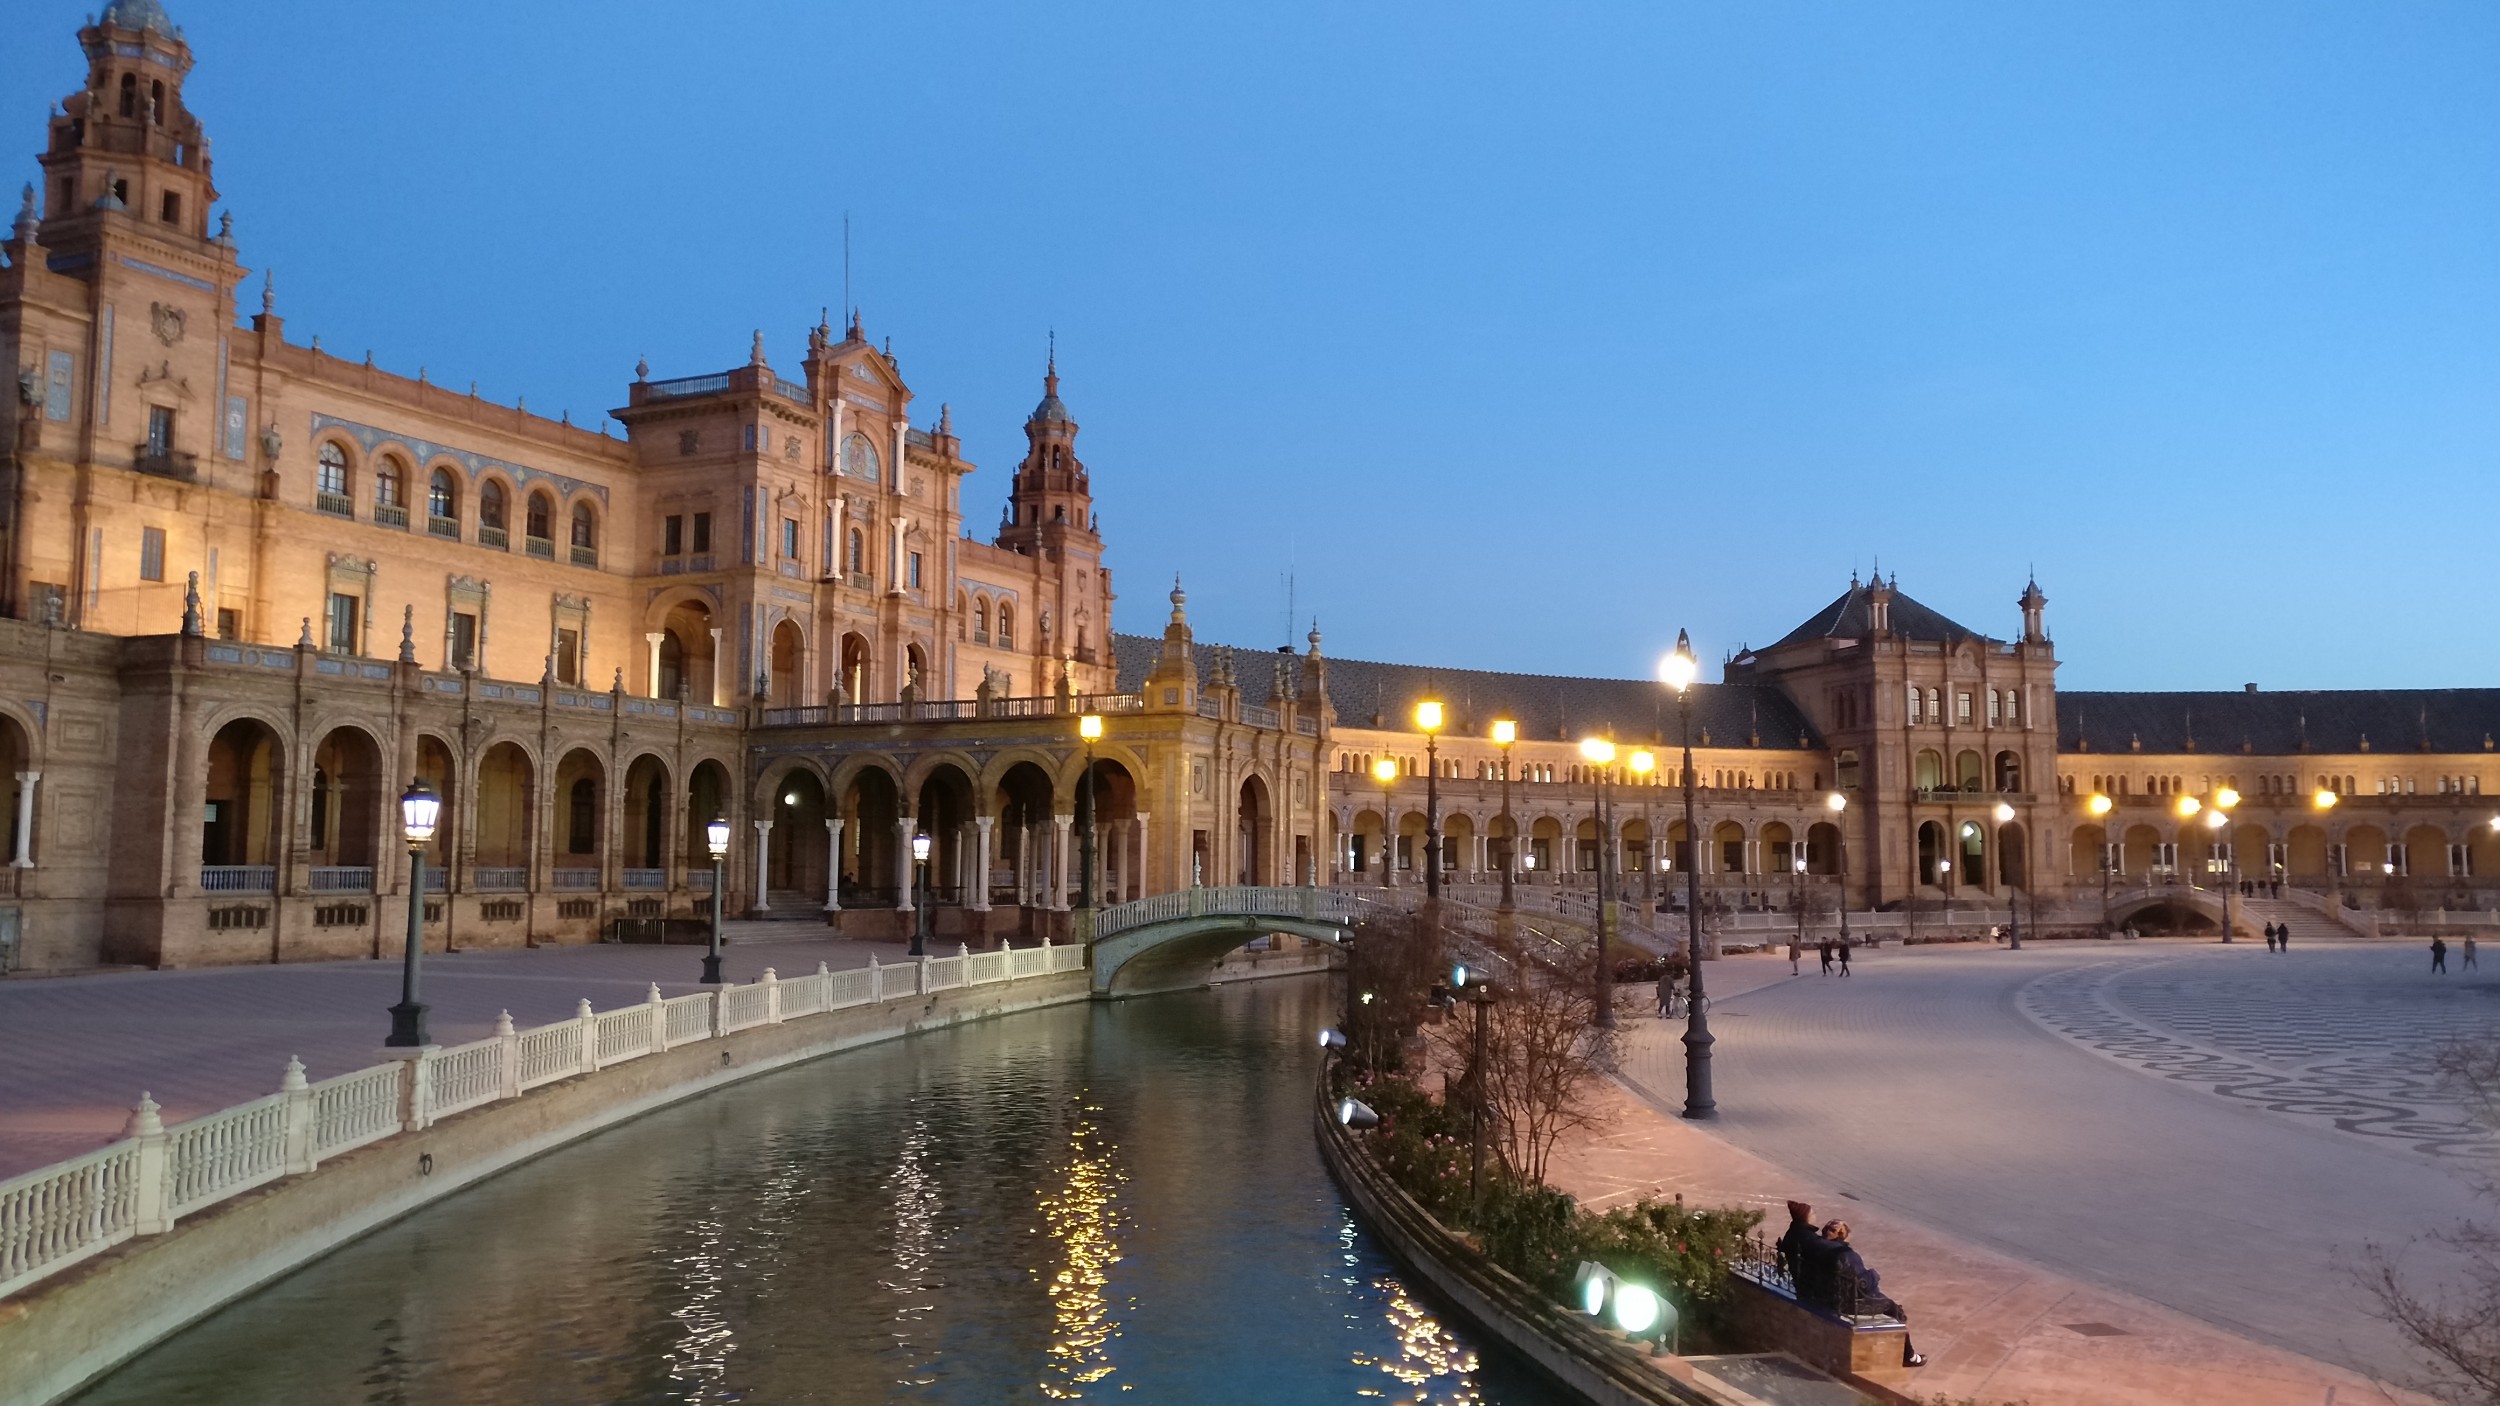 Plaza de Espana & Old Town : Seville | Visions of Travel